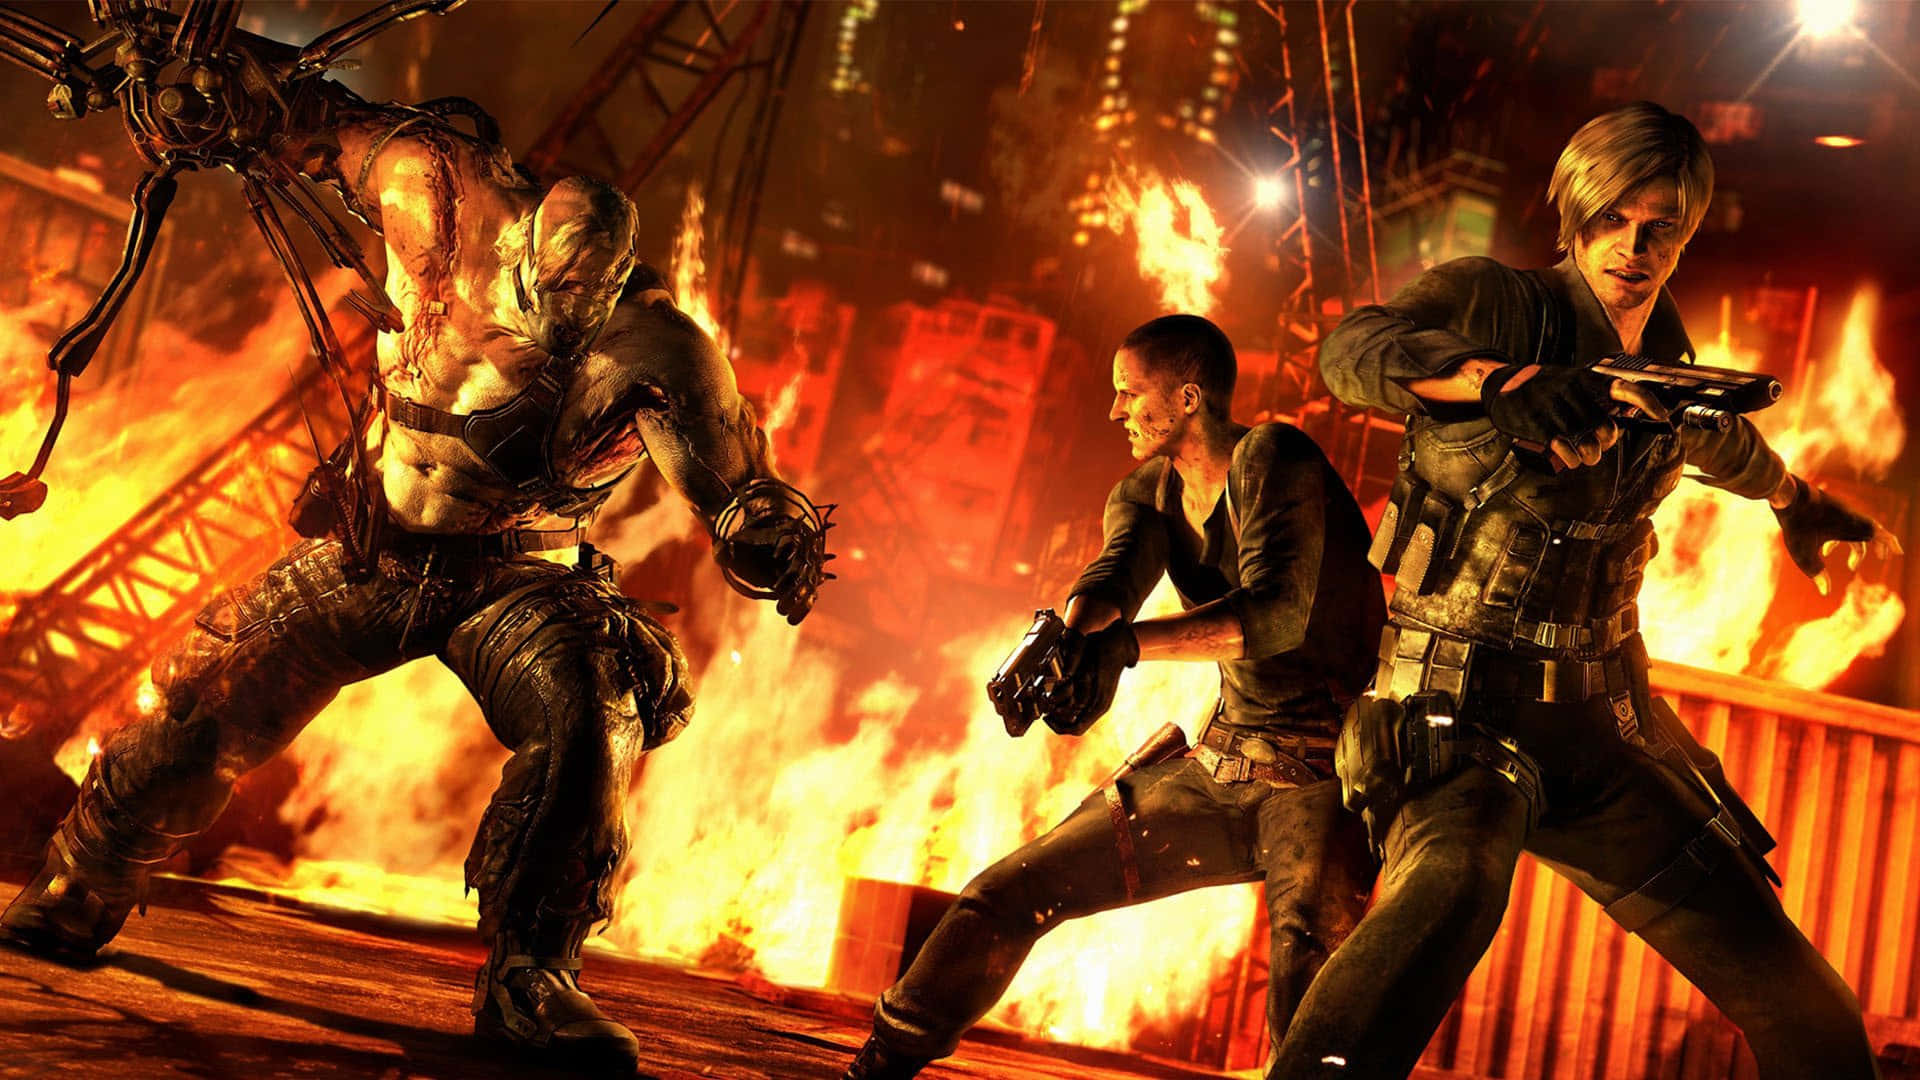 Intense Resident Evil scene with main characters in action.